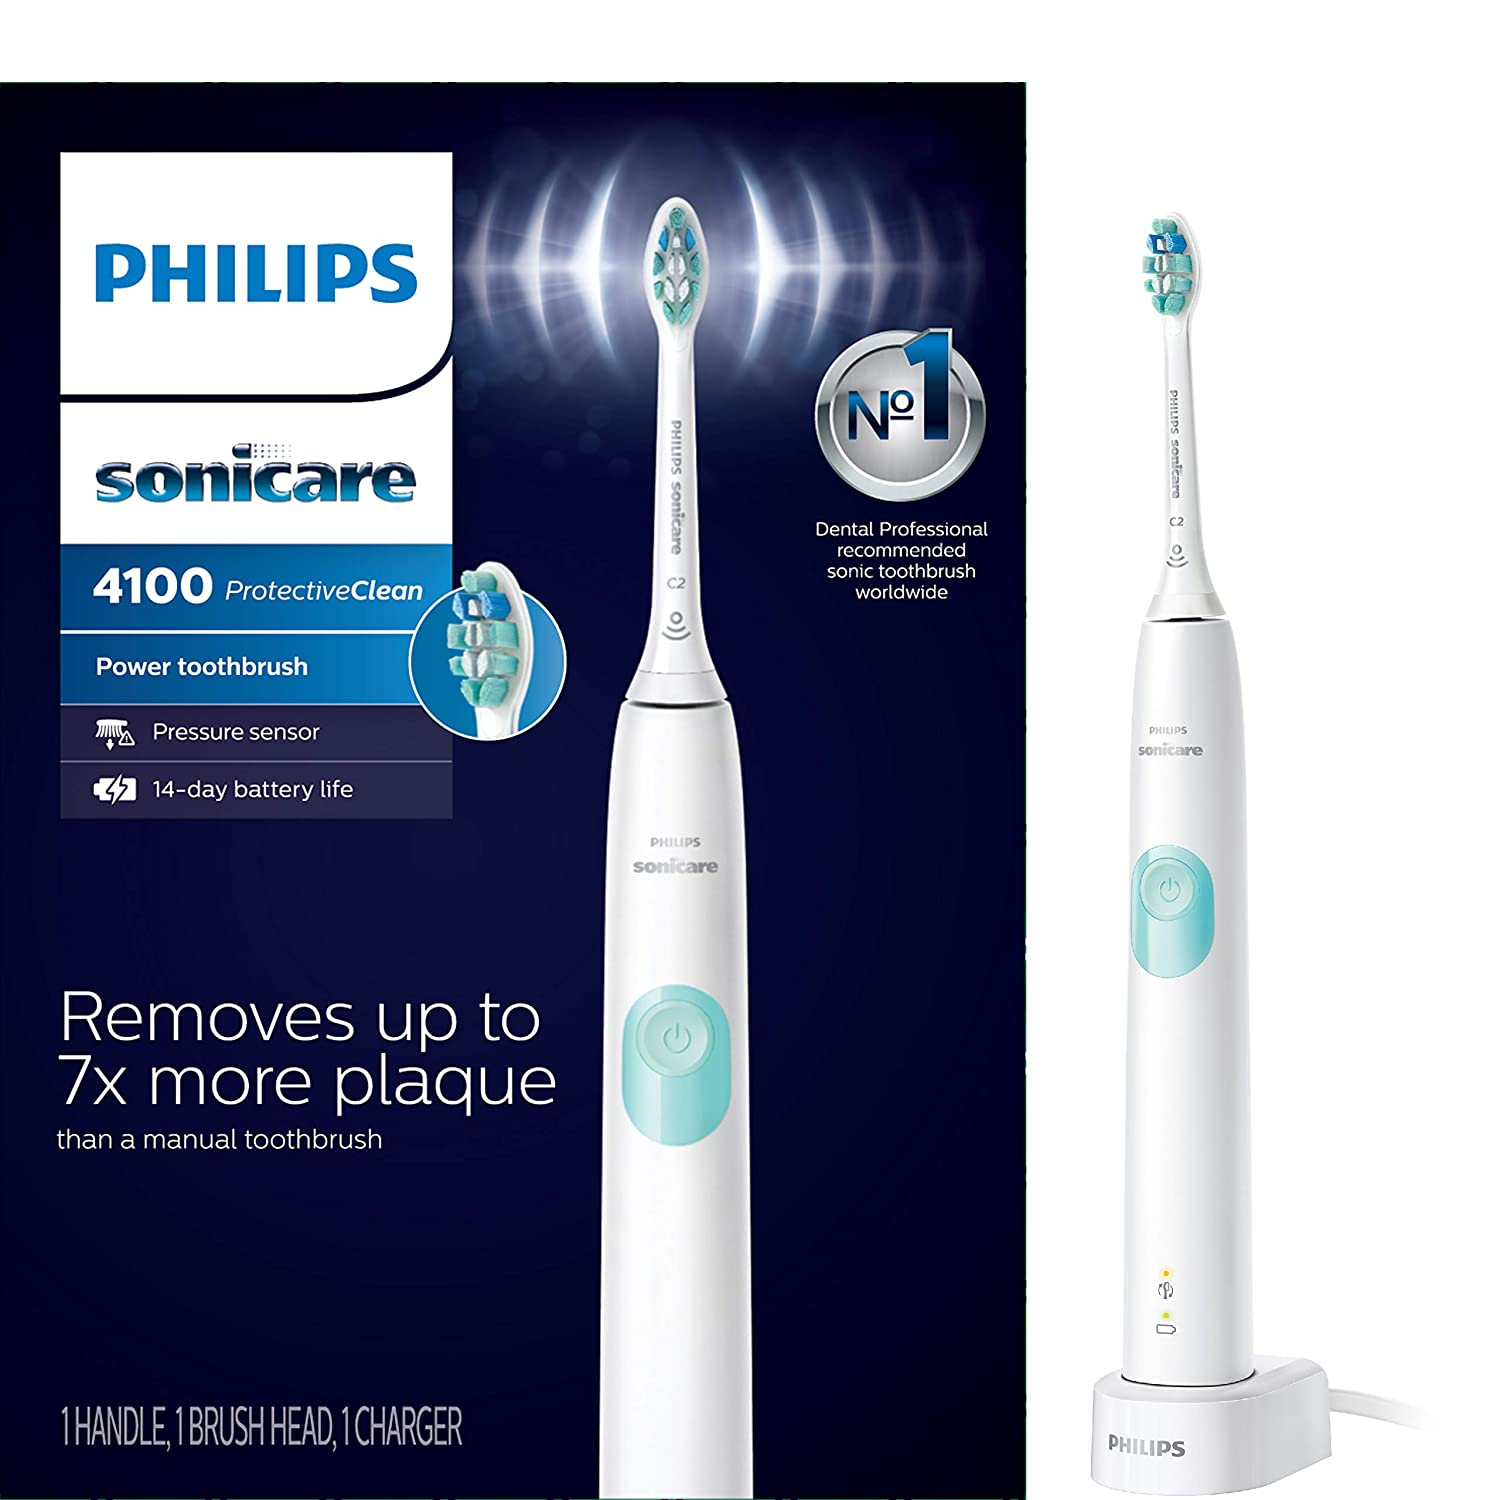 Philips Sonicare 4100 Toothbrush